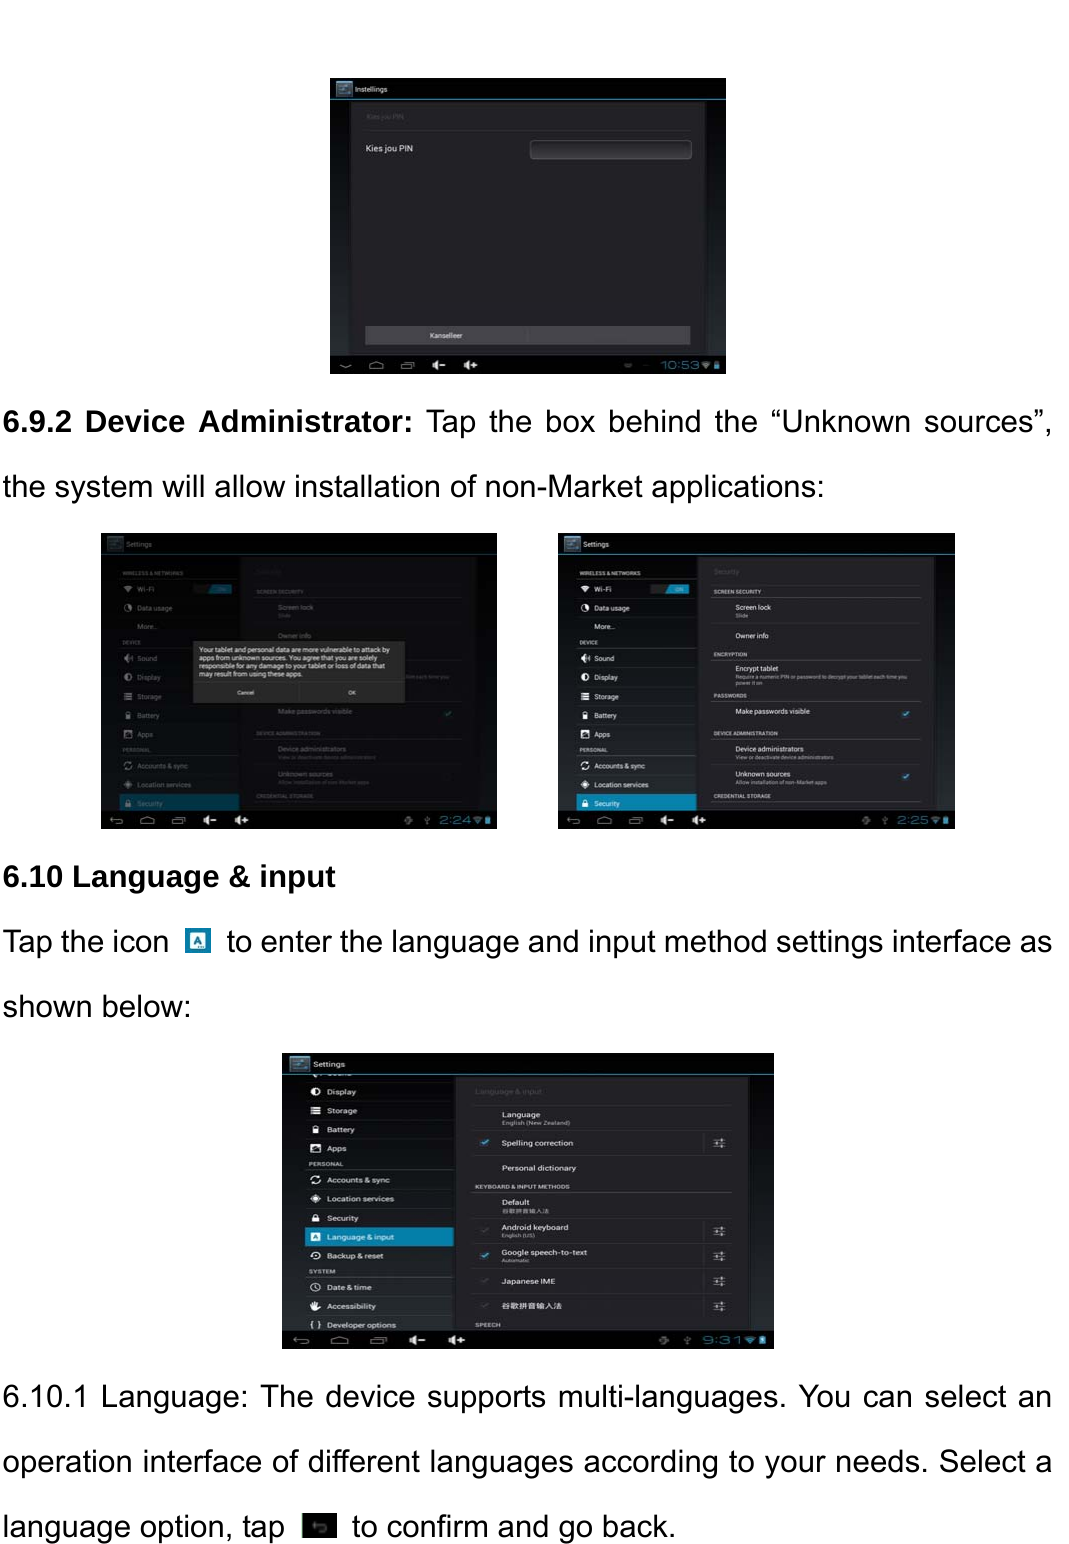     6.9.2 Device Administrator: Tap the box behind the “Unknown sources”, the system will allow installation of non-Market applications:         6.10 Language &amp; input Tap the icon    to enter the language and input method settings interface as shown below:    6.10.1 Language: The device supports multi-languages. You can select an operation interface of different languages according to your needs. Select a language option, tap    to confirm and go back. 